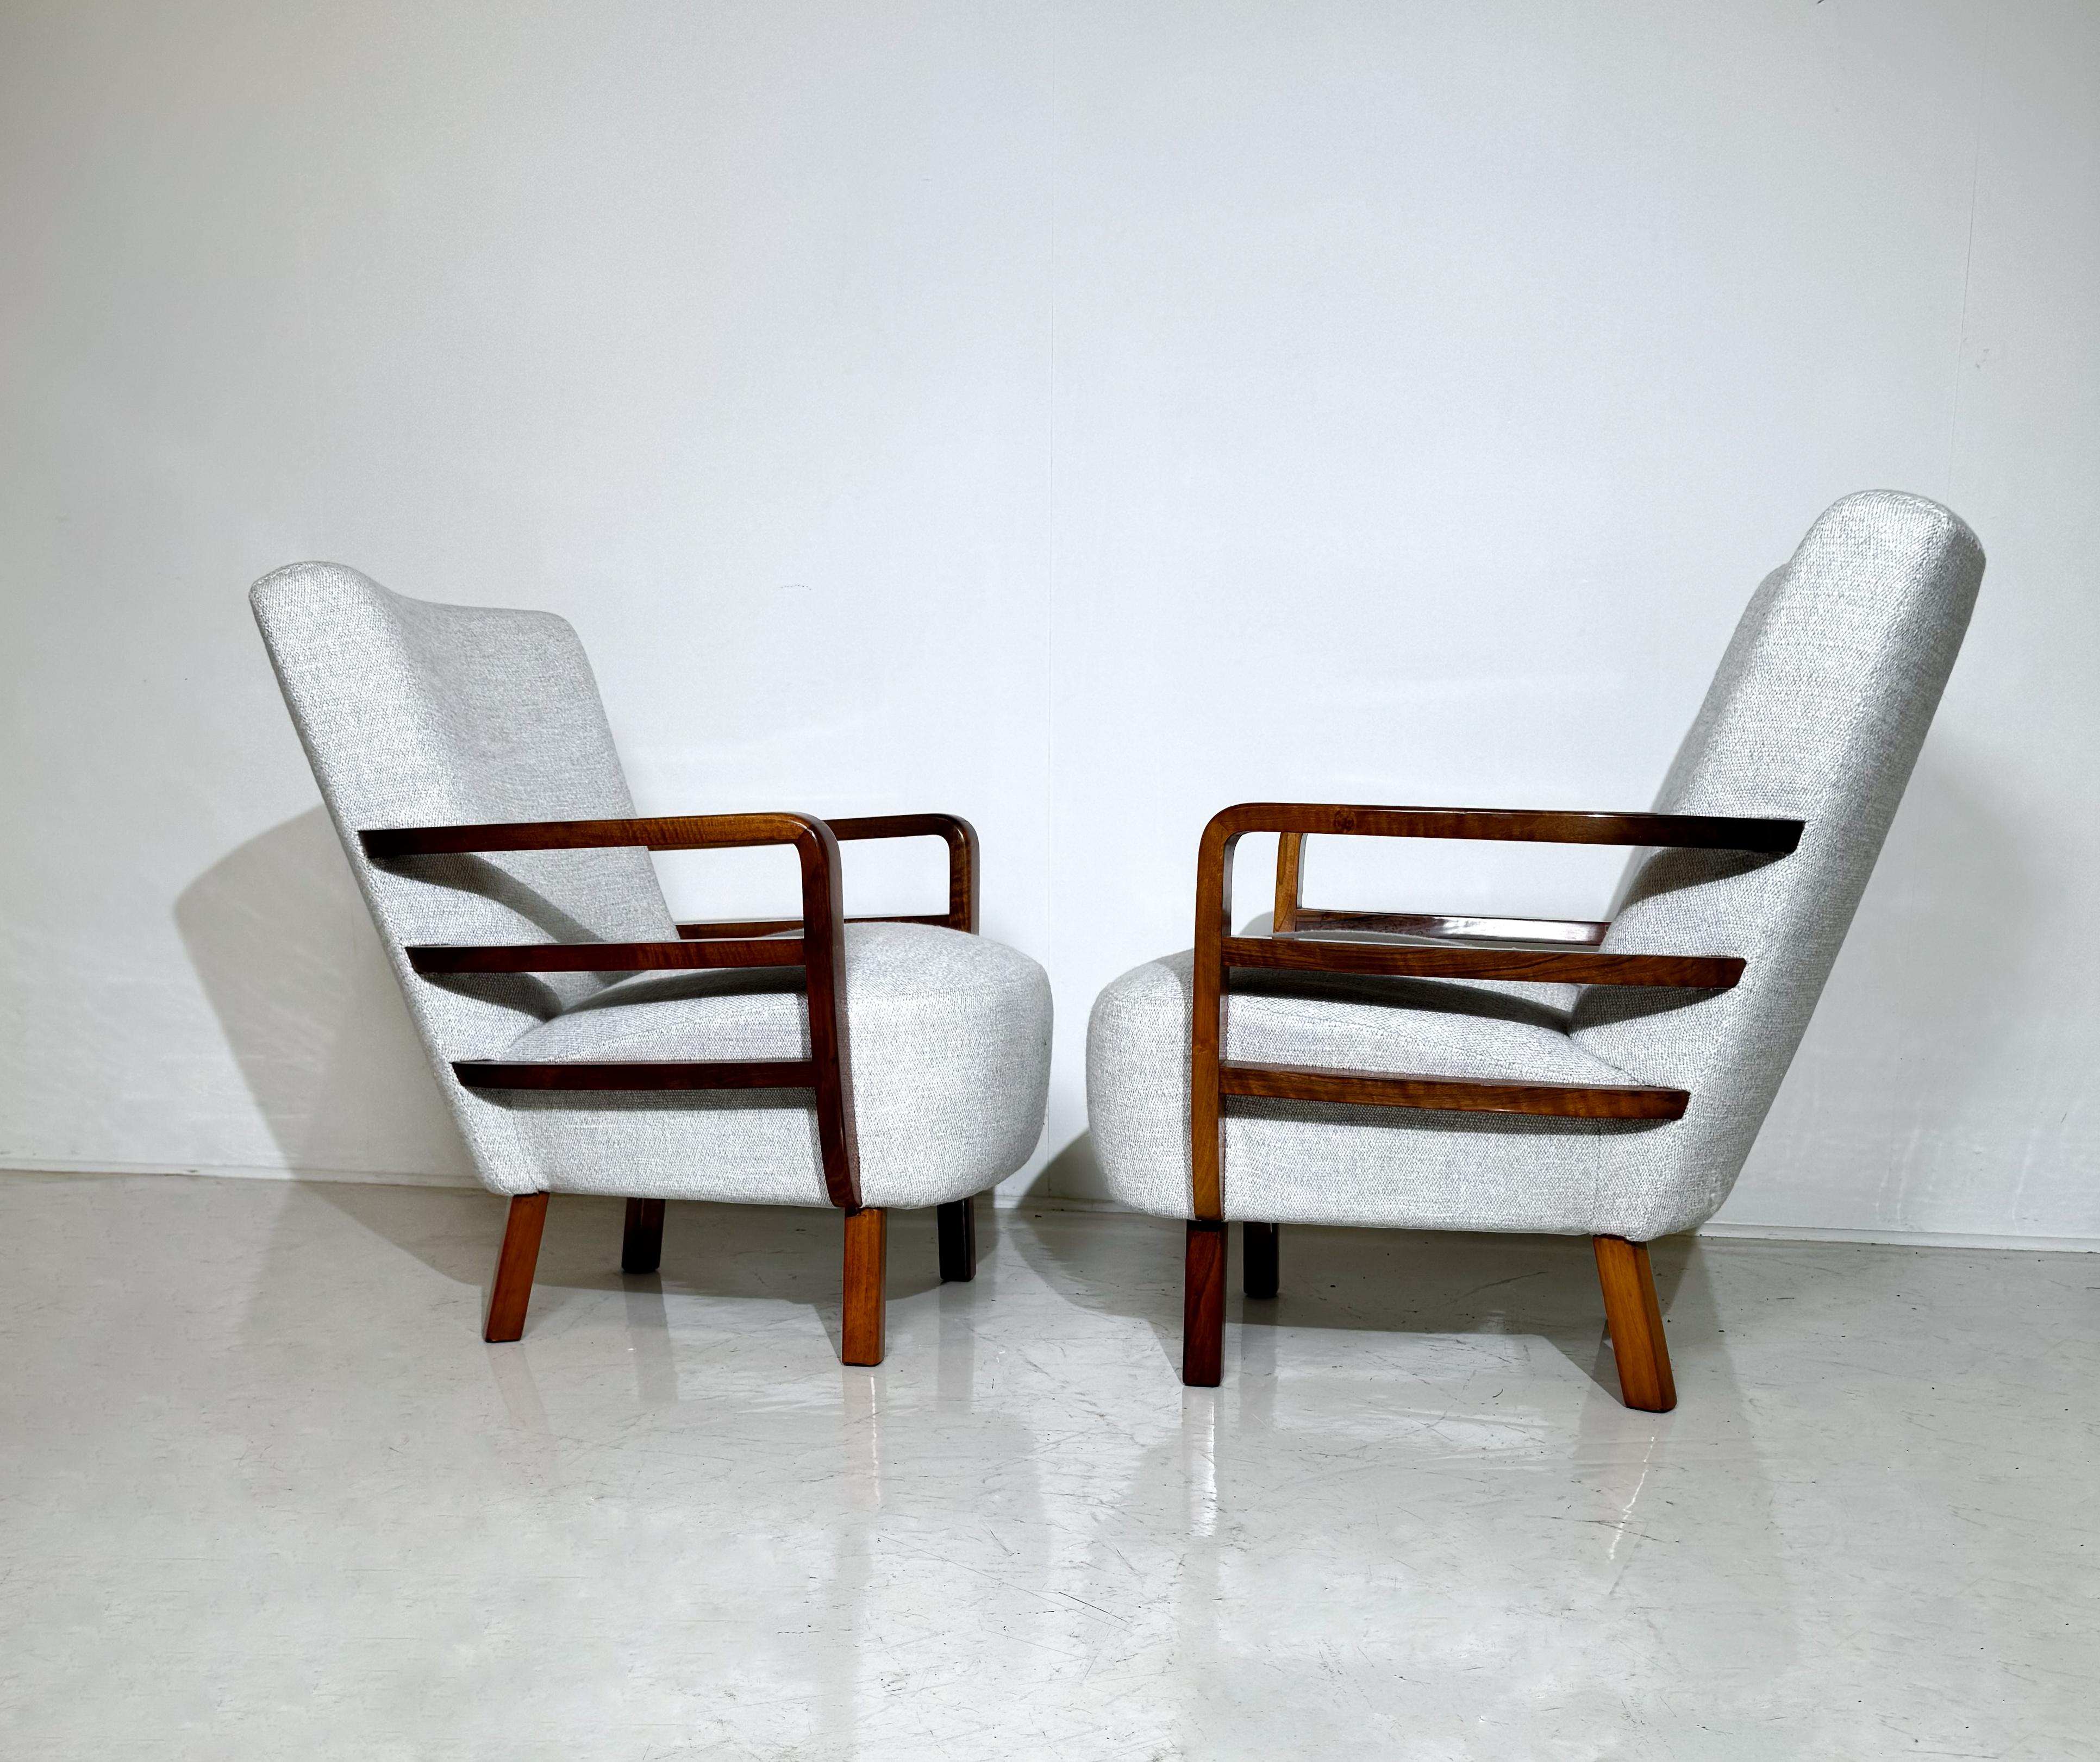 Pair of Art Deco Armchairs, Walnut, Hungary - New Upholstery For Sale 1